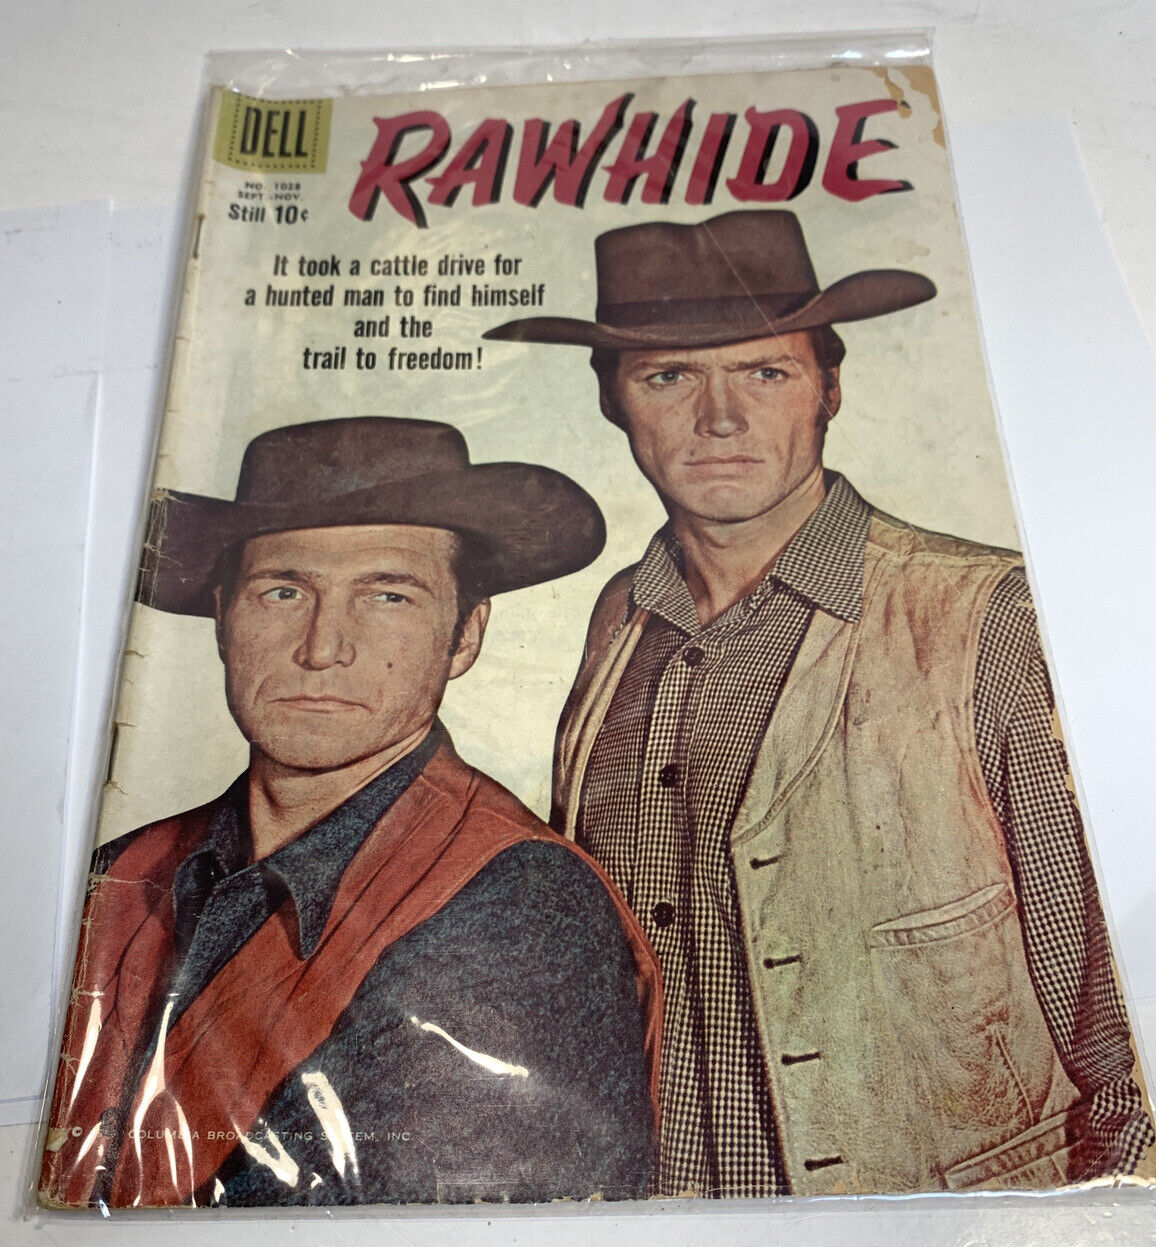 Rawhide #1028 Four Color Dell Comics 1959 Clint Eastwood Photo Cover #1 Issue